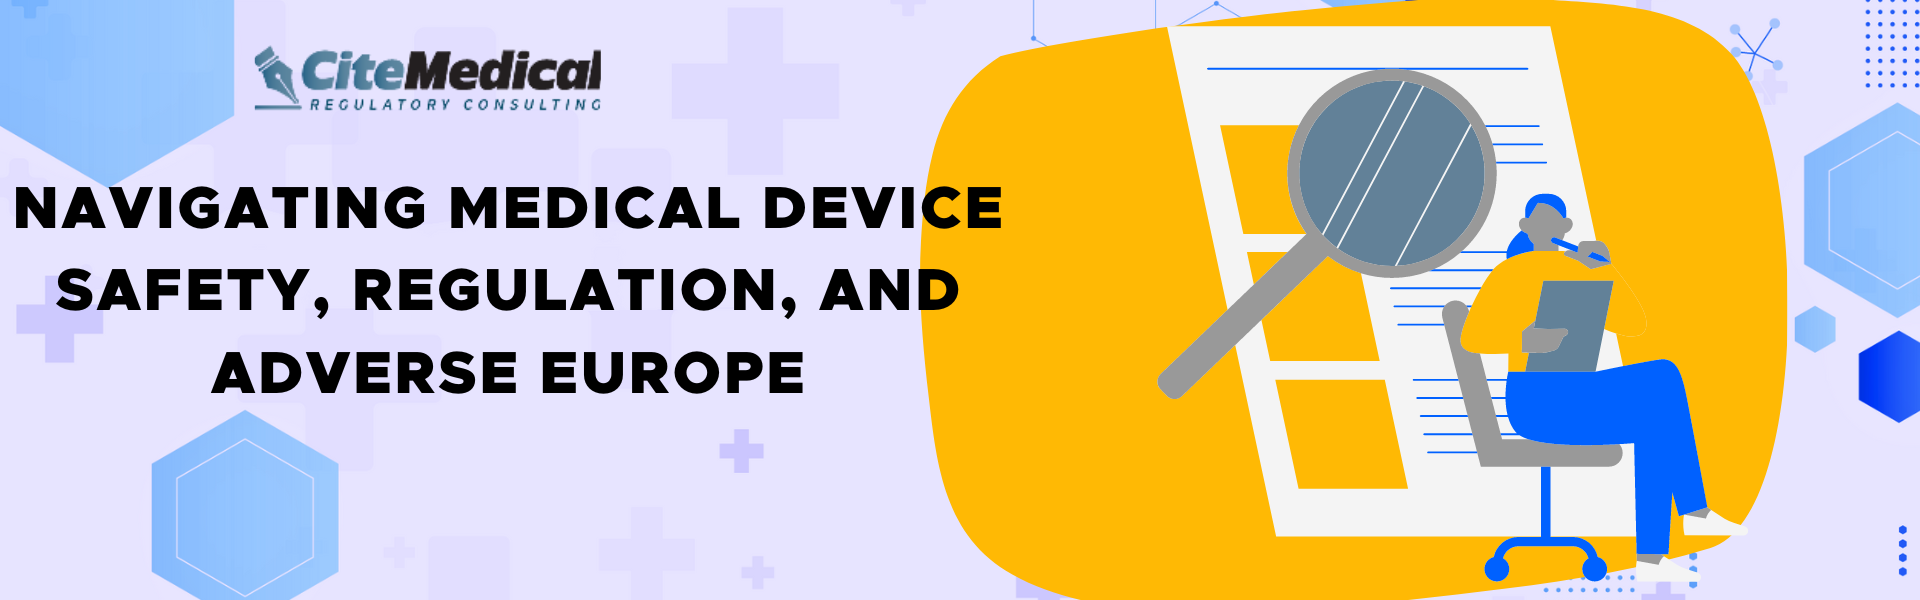 Navigating Medical Device Safety, Regulation, and Adverse Europe